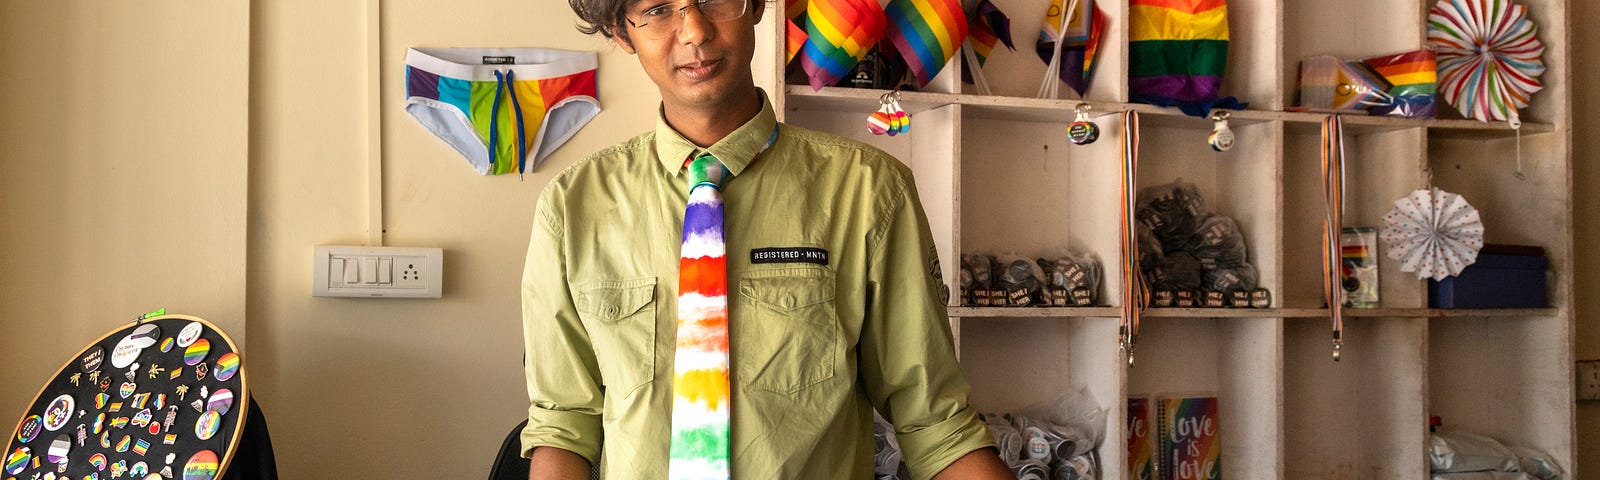 A man wearing a rainbow tie stands behind a store desk. Behind him the walls are covered in rainbow merchandise.